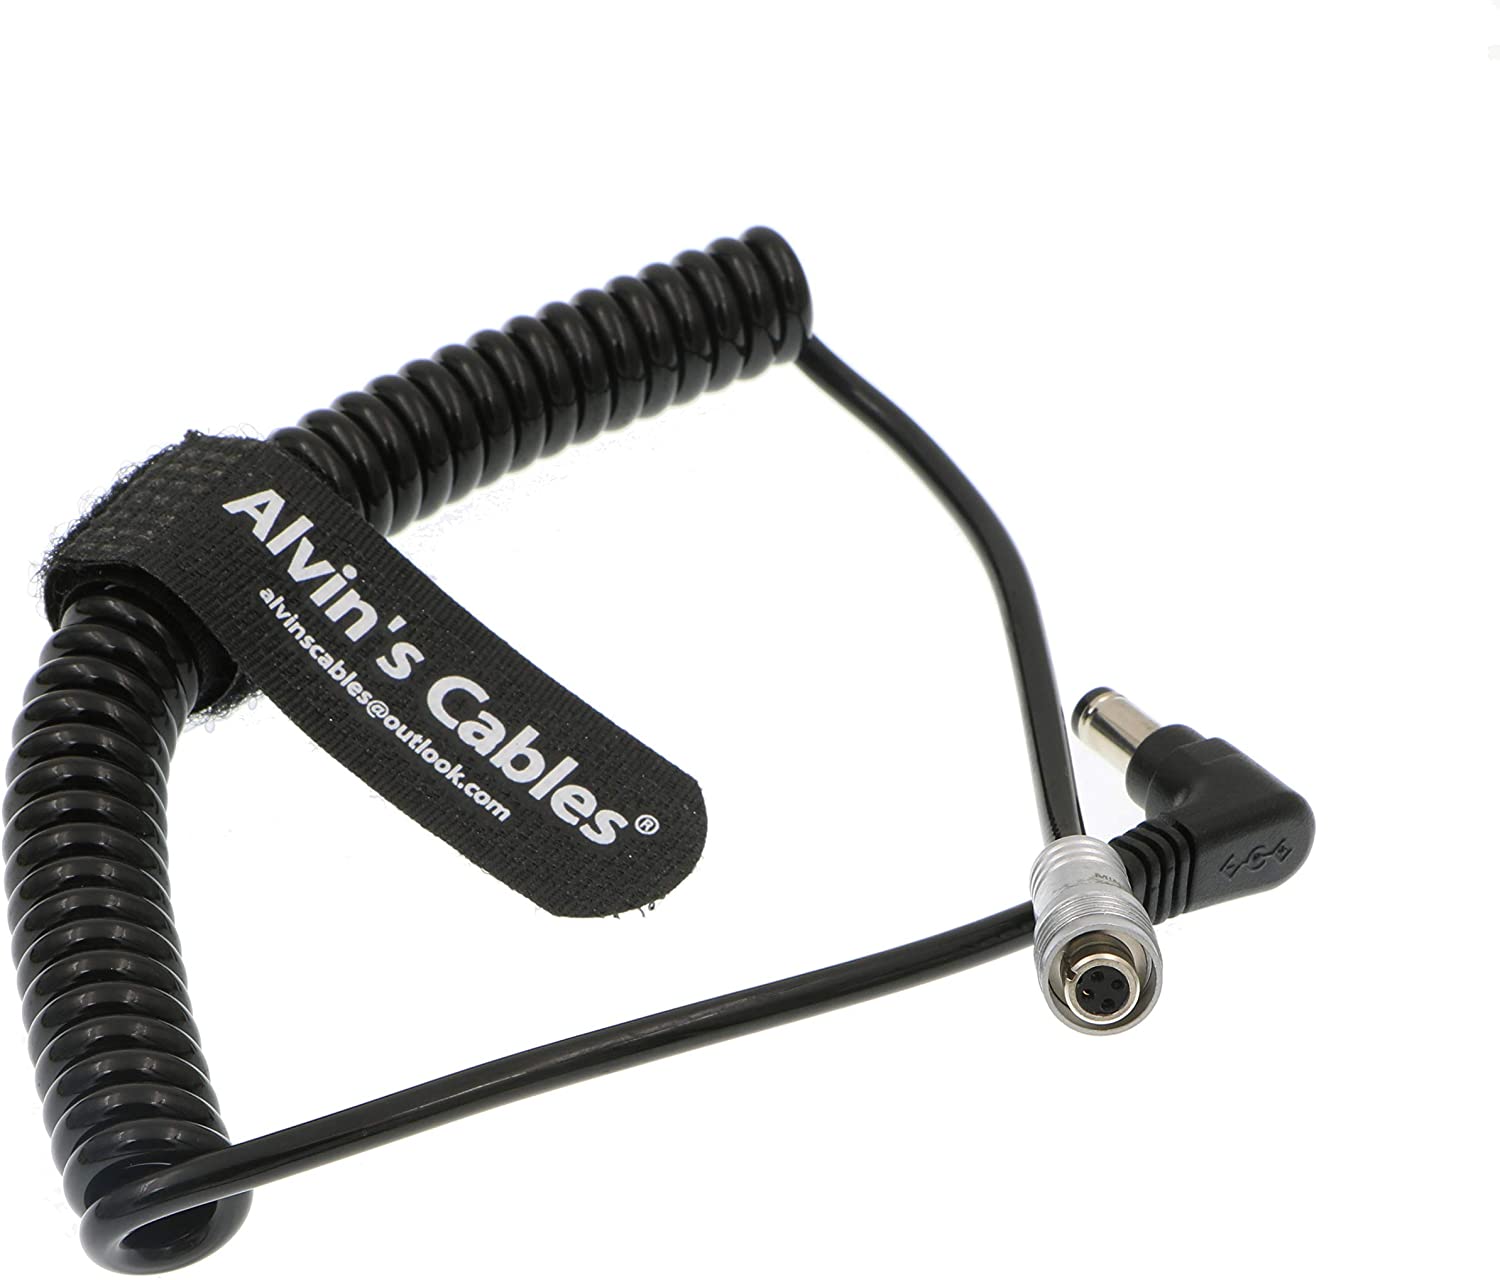 Alvin's Cables PORTKEYS BM5 BM7 Monitor Power Cable 4 Pin Female to DC Male Right Angle Coiled Power Cord